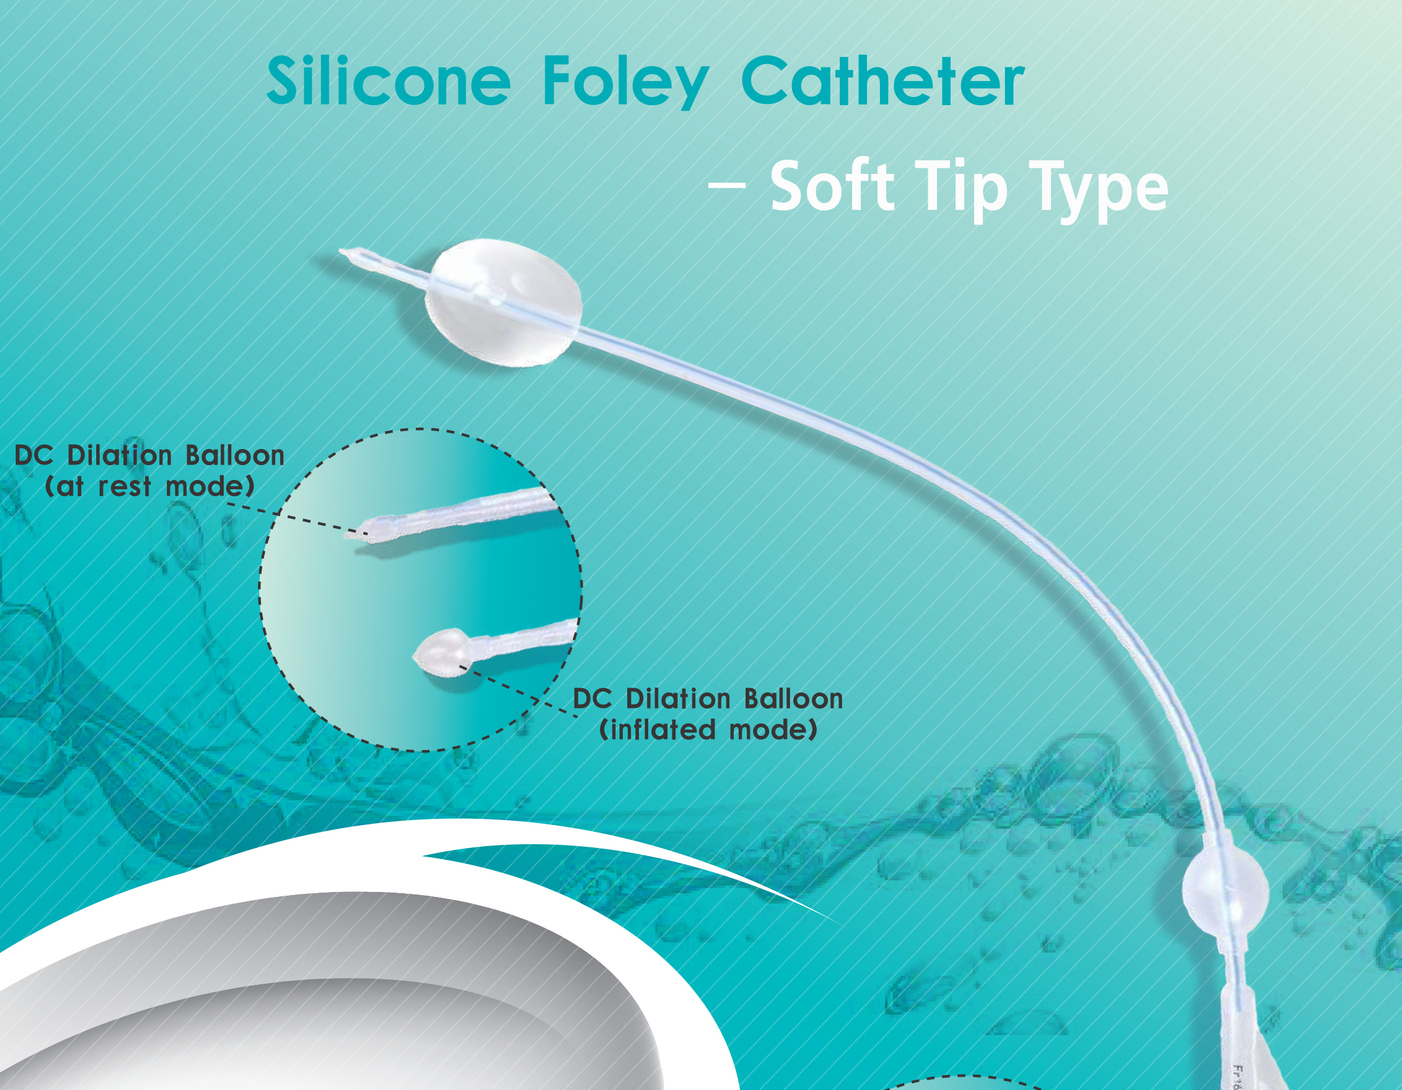 <p><span style="font-weight: bold;">Silicone Foley Catheter - Soft Tip Type</span><br></p>